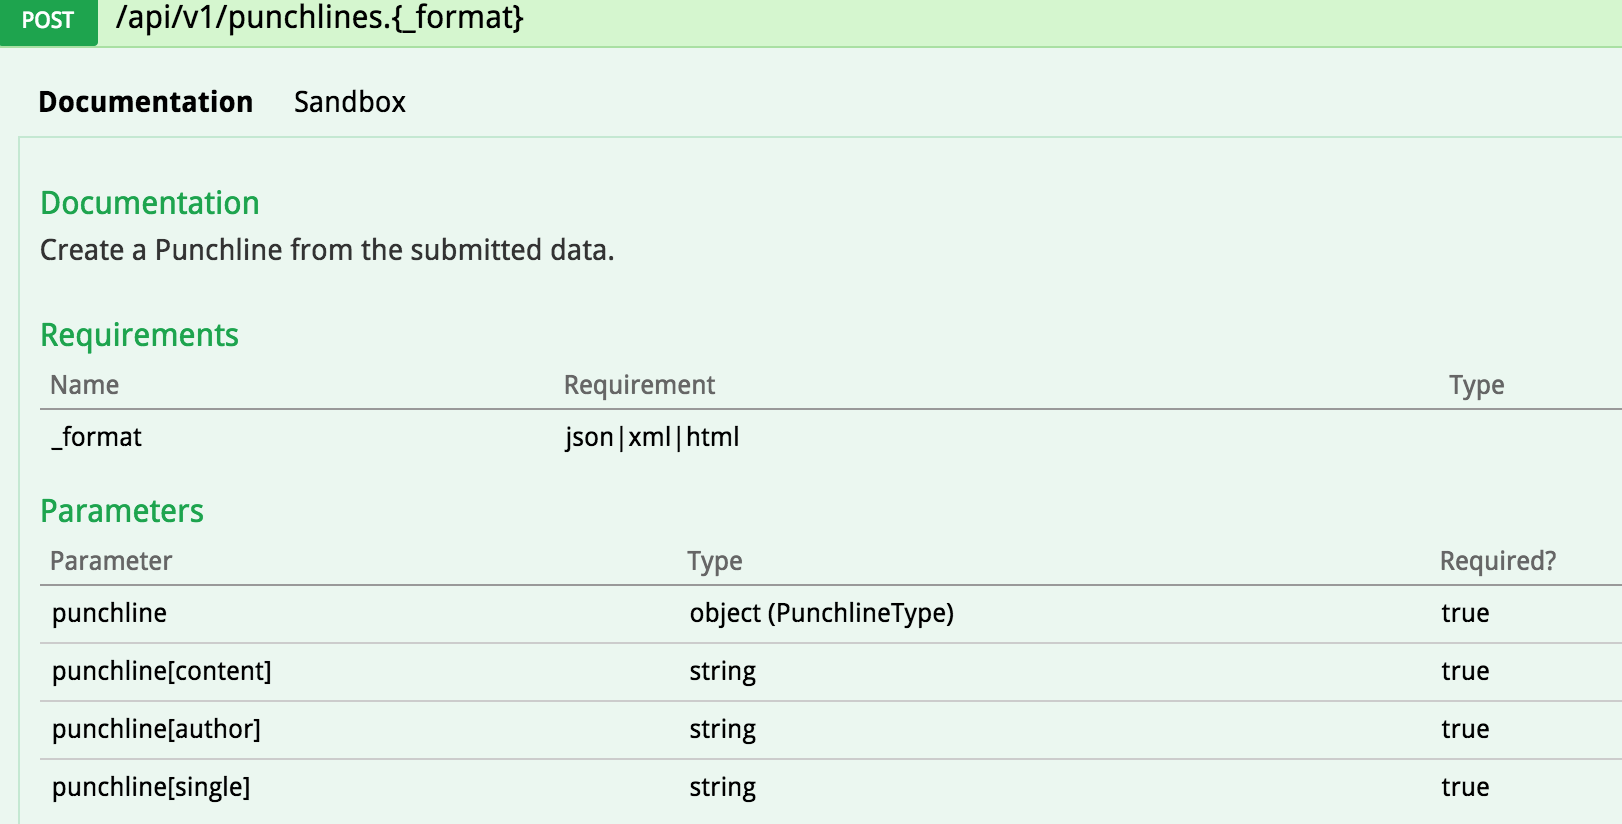 Api web interface of the post endpoint